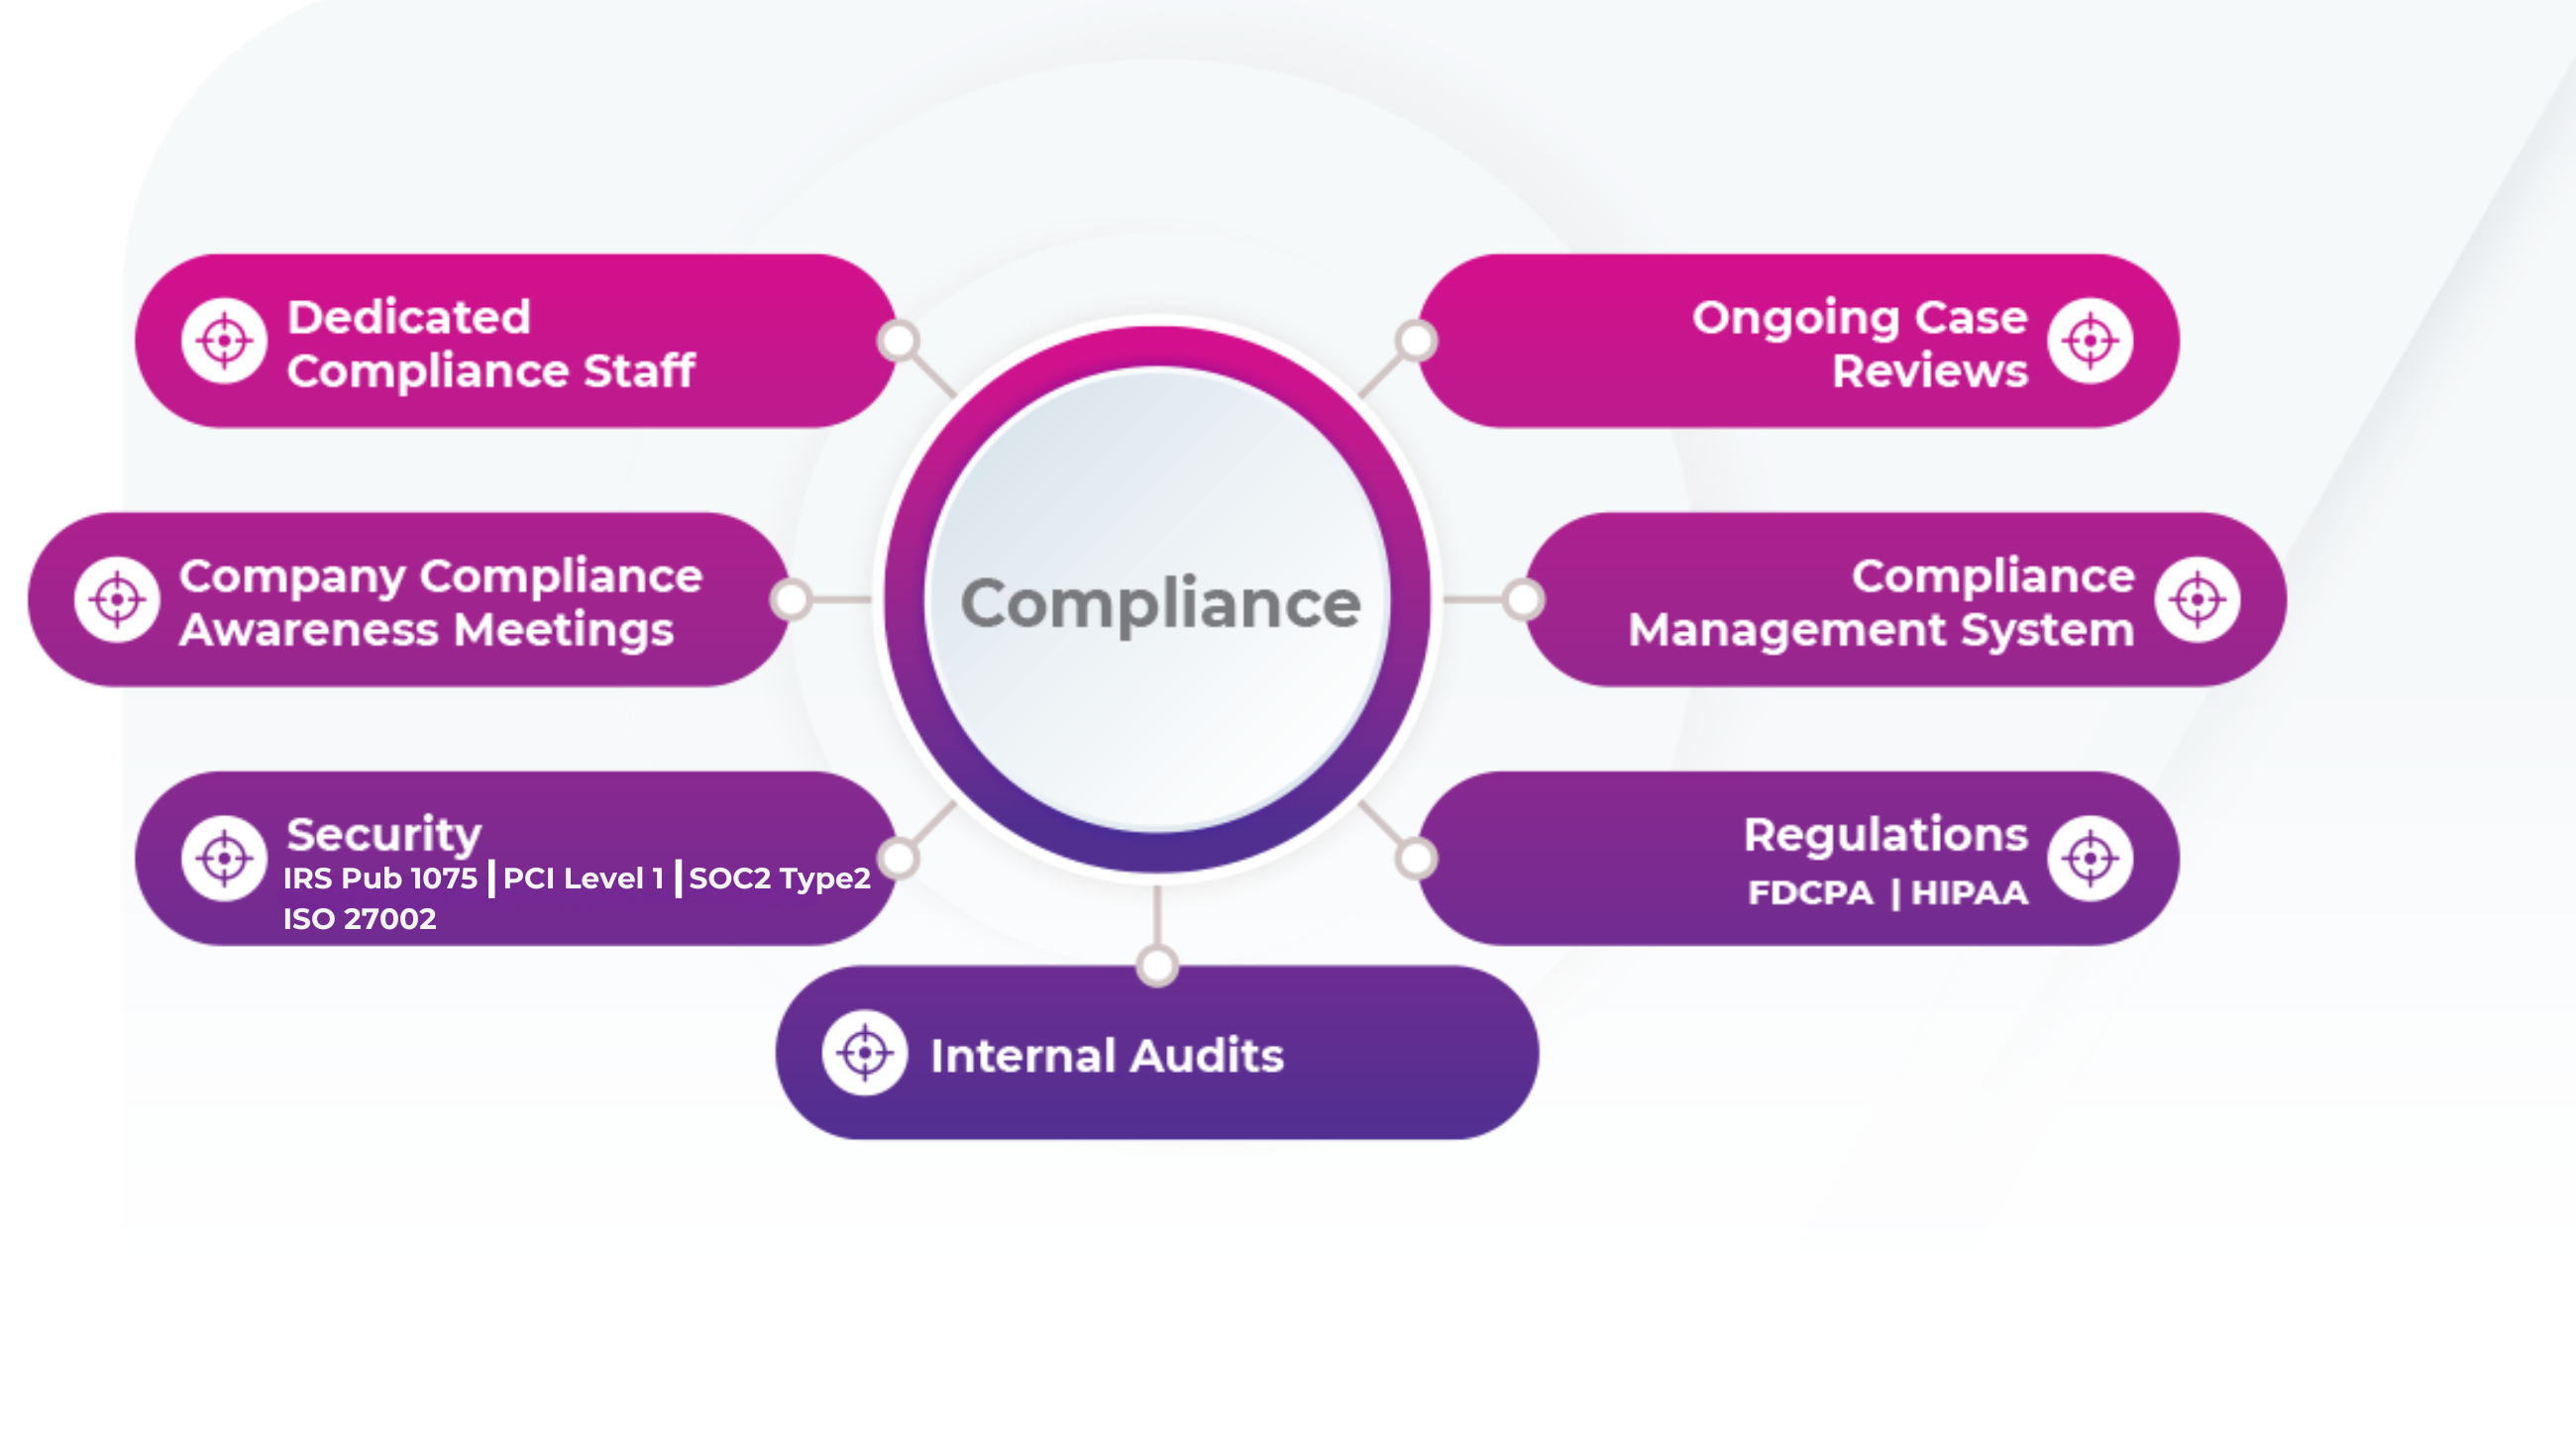 Compliance includes ongoing case reviews, compliance management system, regulations (FDCPA and HIPAA), internal audits, security, company compliance awareness meetings, and dedicated compliance staff.